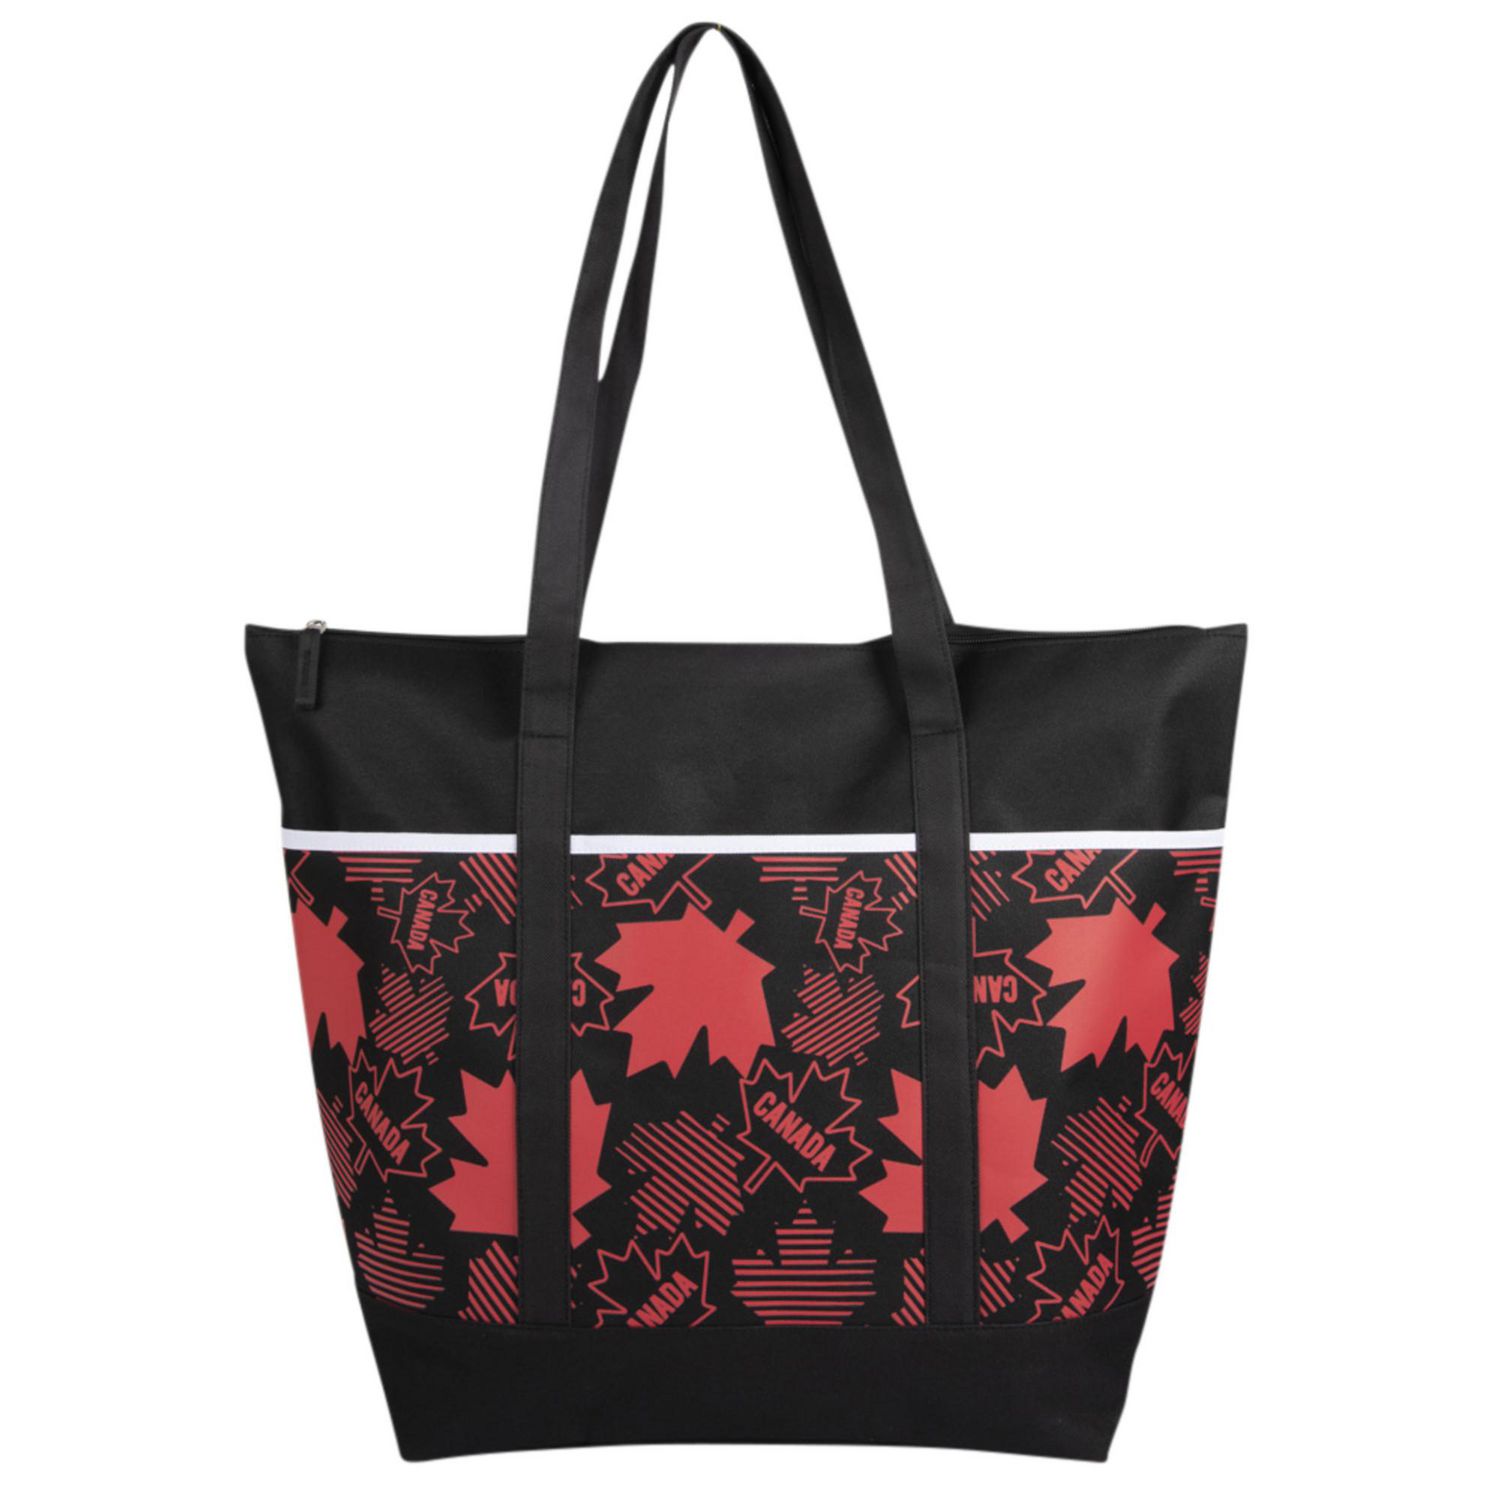 Canada Tote Bag by Travel Poster Co. | Society6